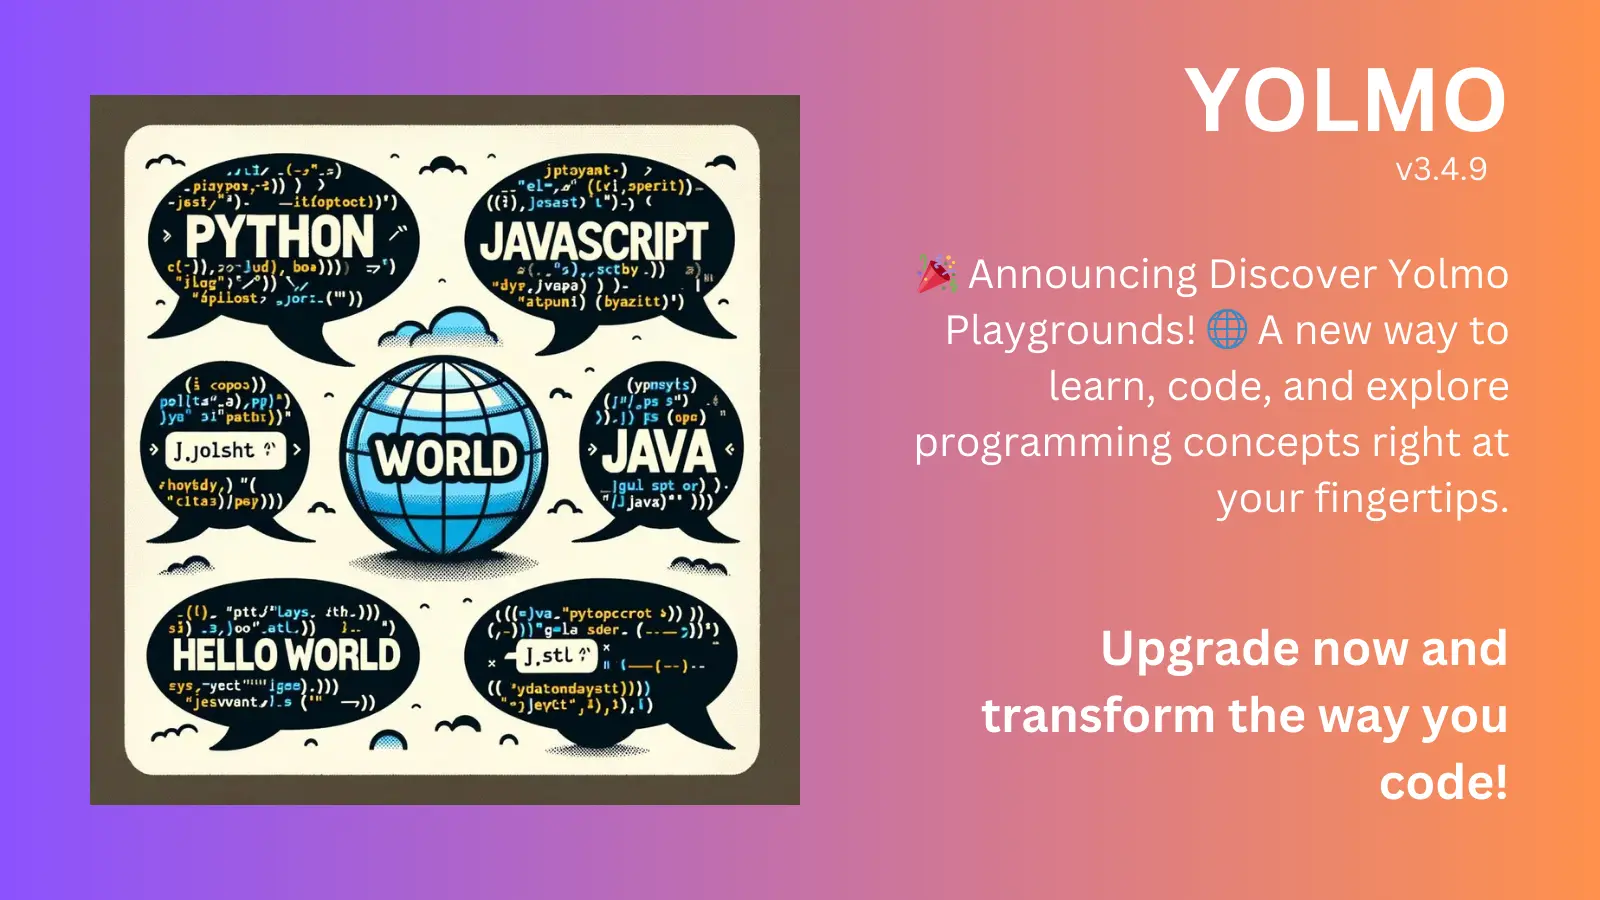 🎉 Announcing Discover Yolmo Playgrounds! 🌐 A new way to learn, code, and explore programming concepts right at your fingertips.